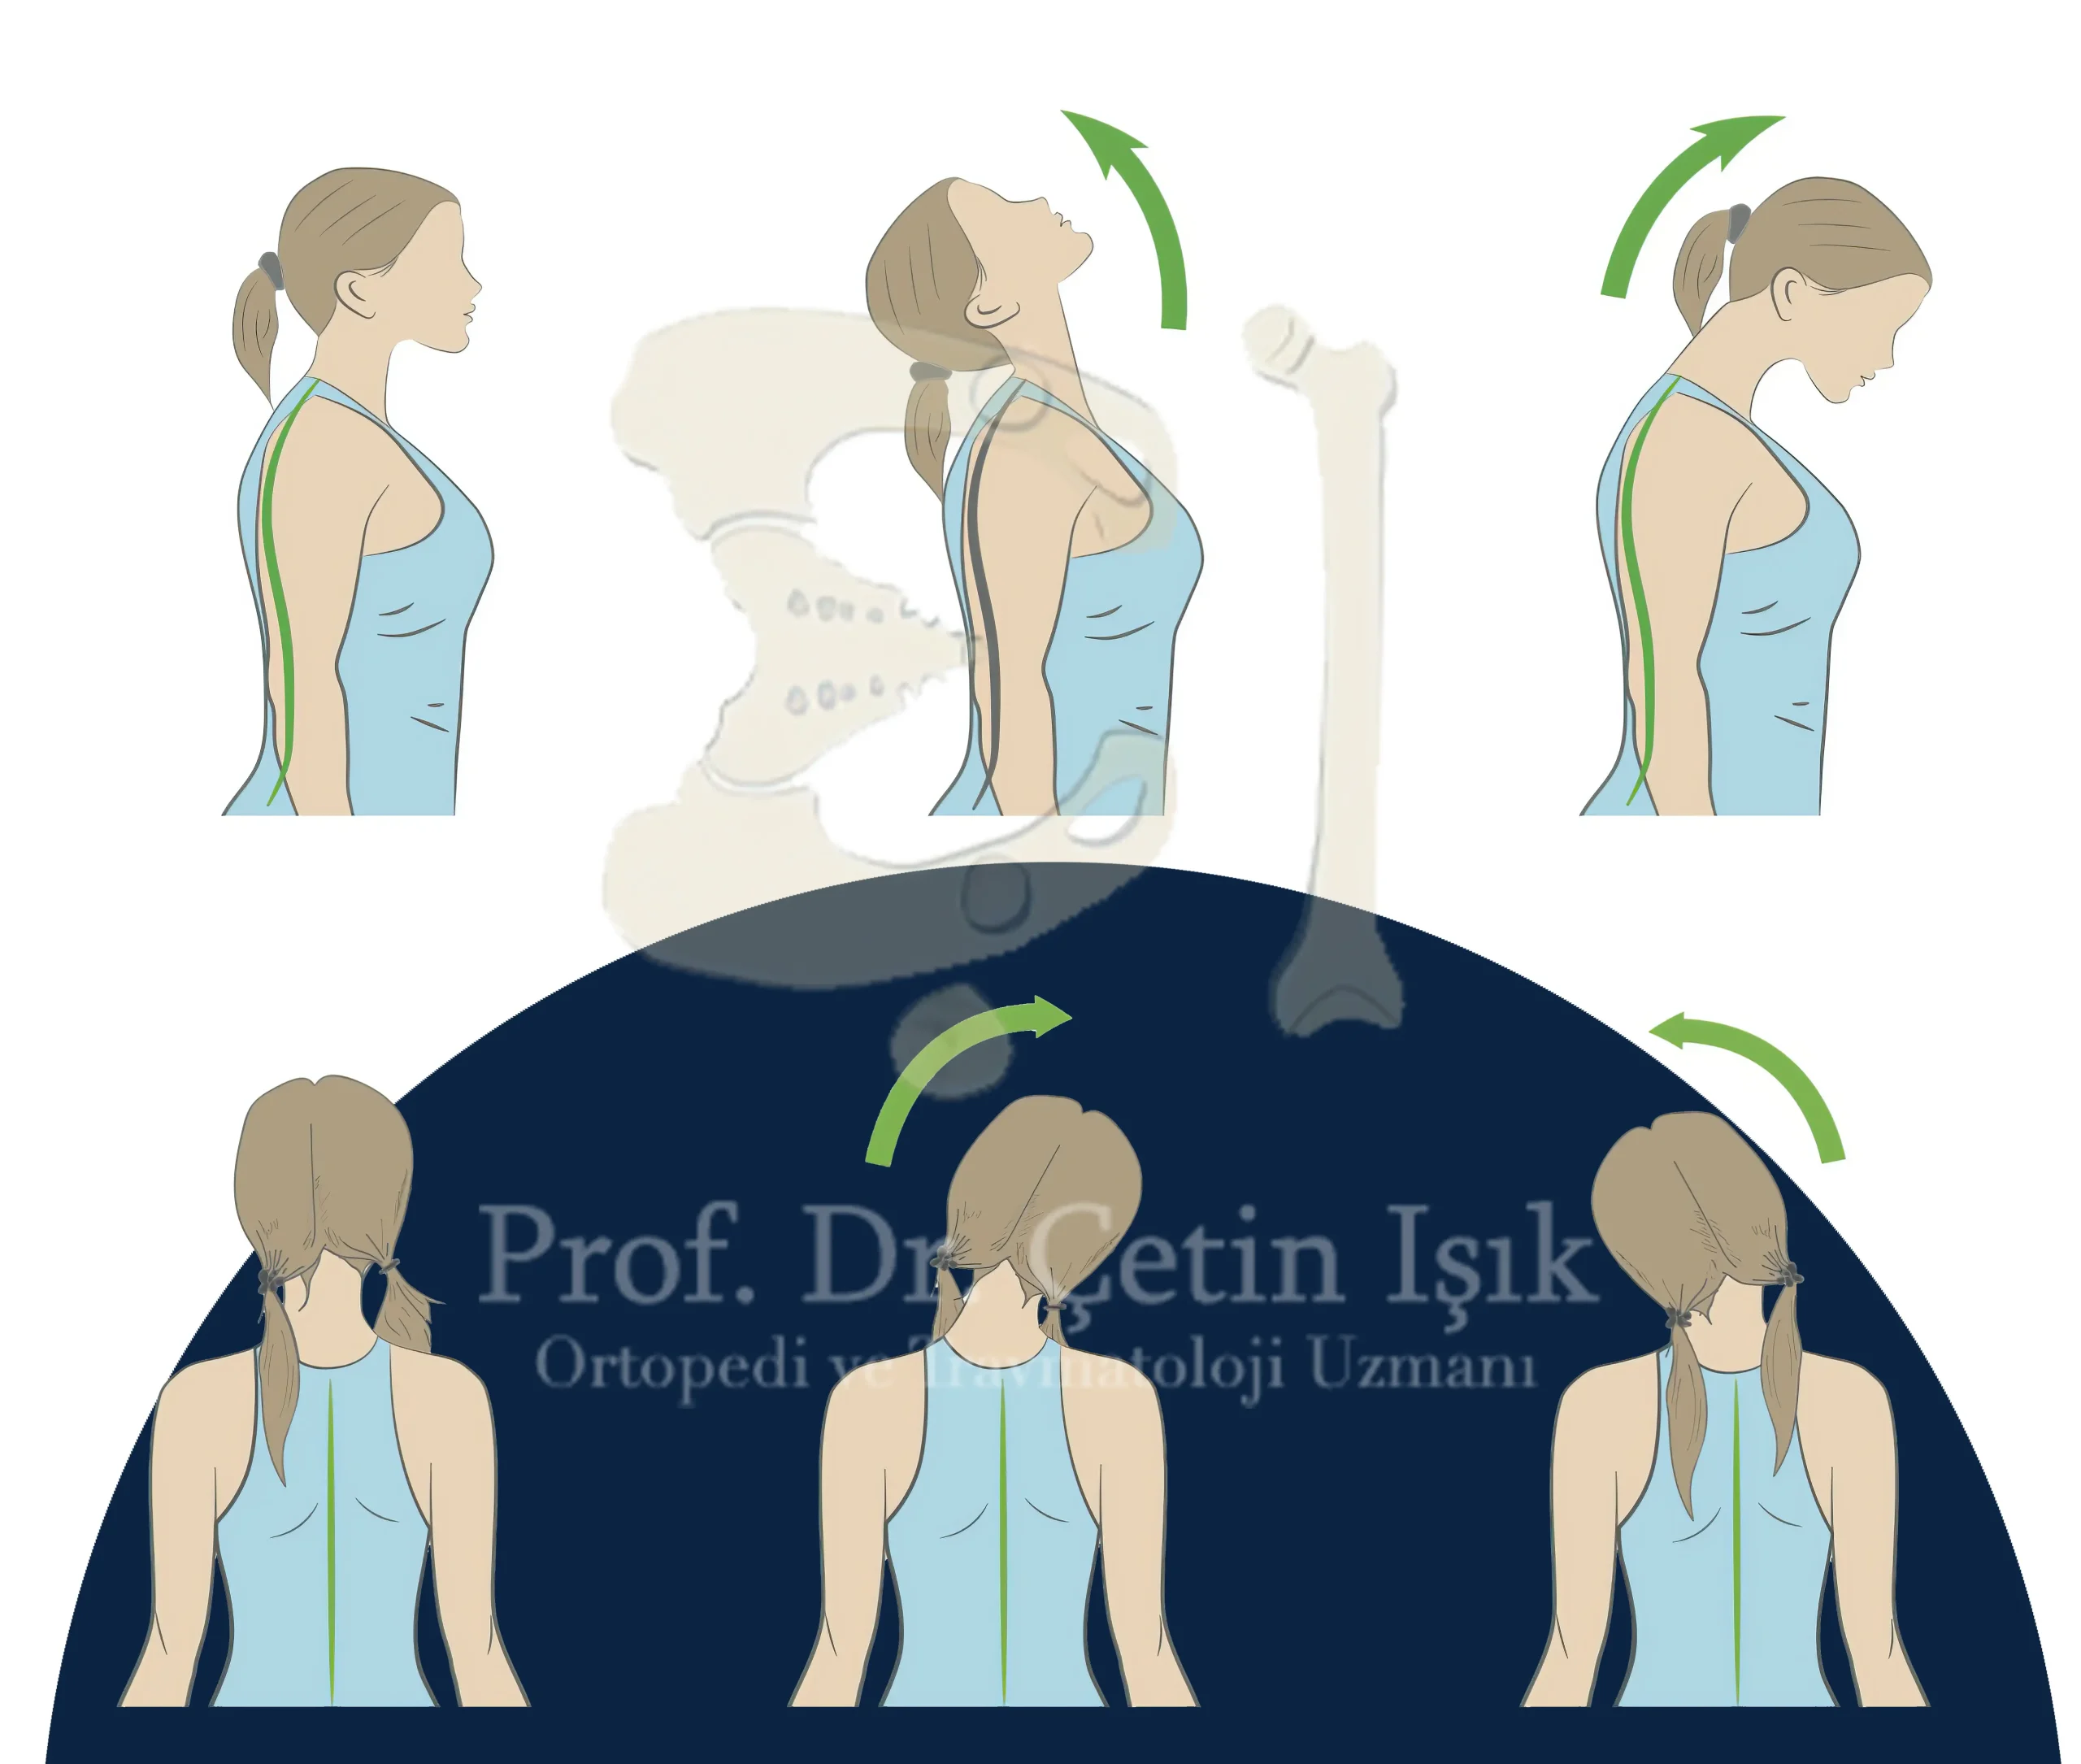 Image showing physiotherapy exercises that can be done to manage inflammation of the neck tendons. The exercises include an extension of the neck (backward), a flexion movement (forward), and tilting the head left and right